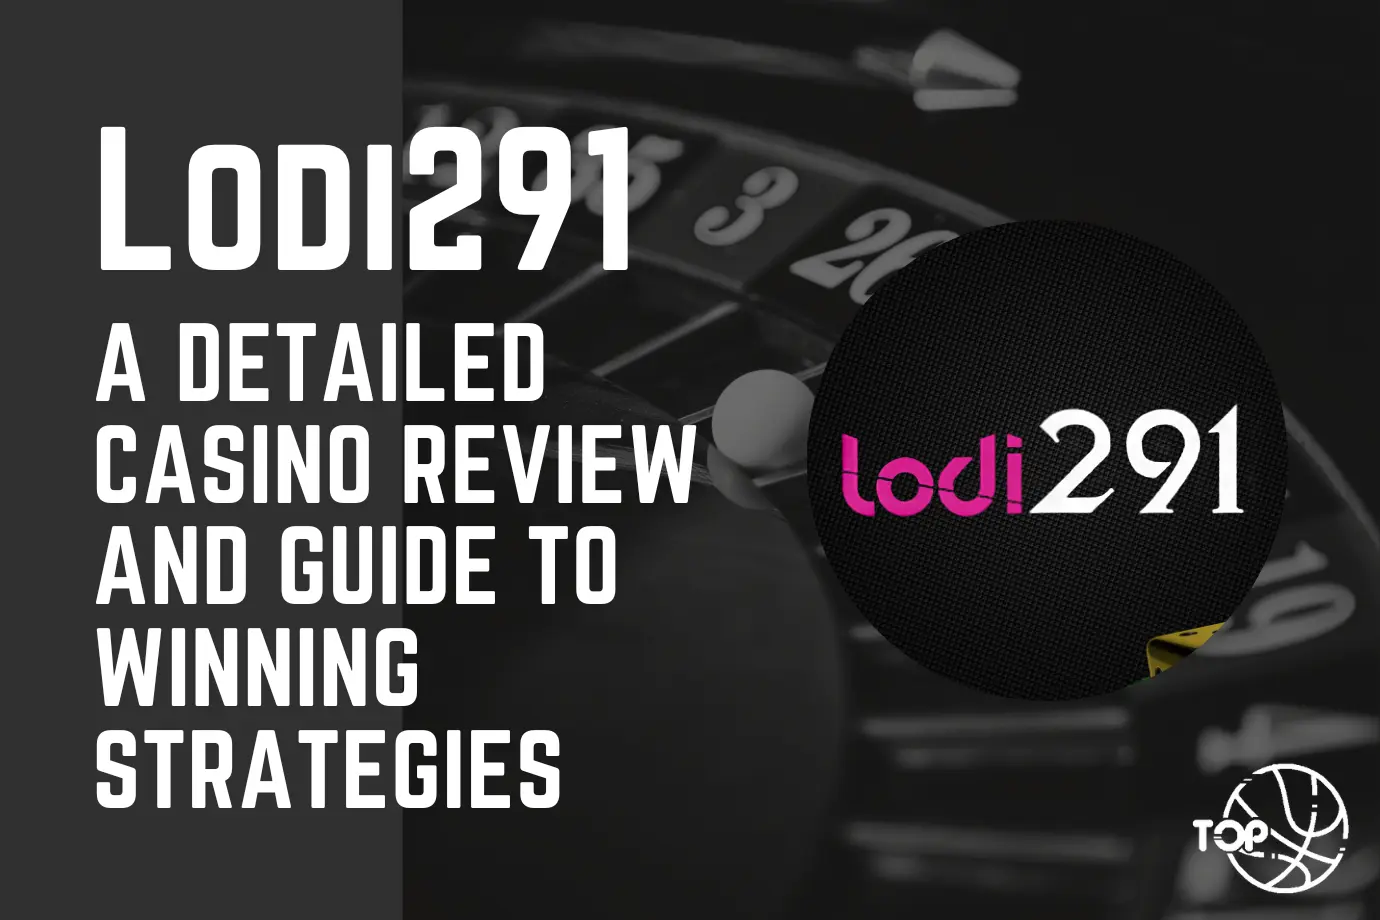 Lodi291: A Detailed Casino Review and Guide to Winning Strategies